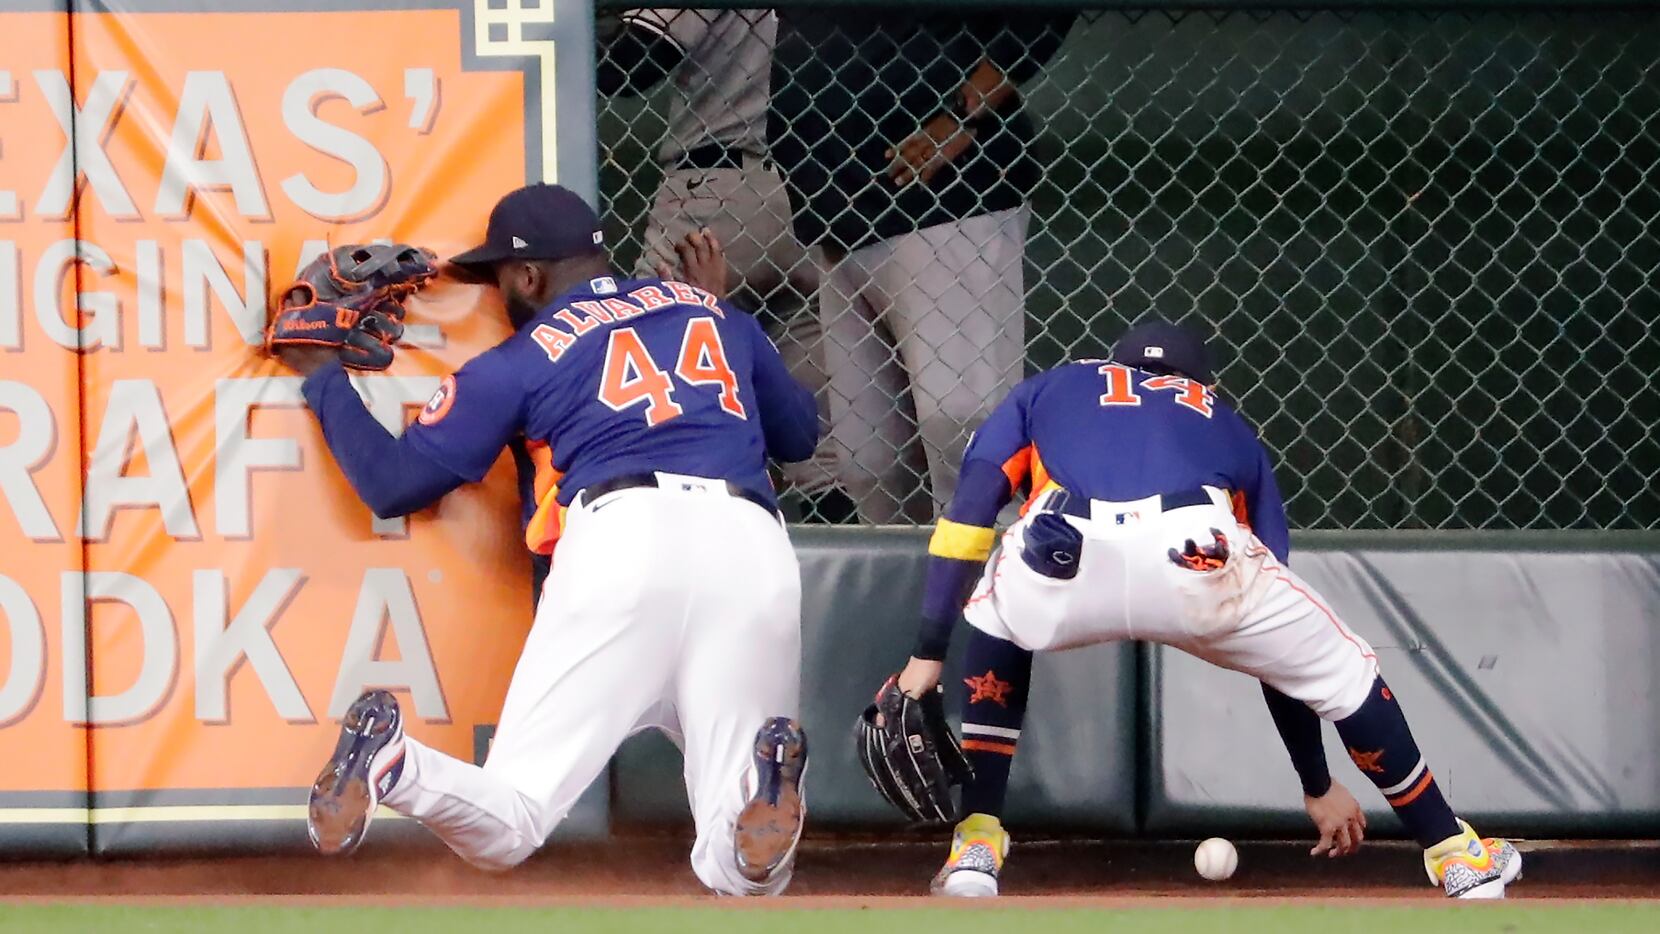 Astros swept by Yankees, tied for 2nd in AL West with Rangers